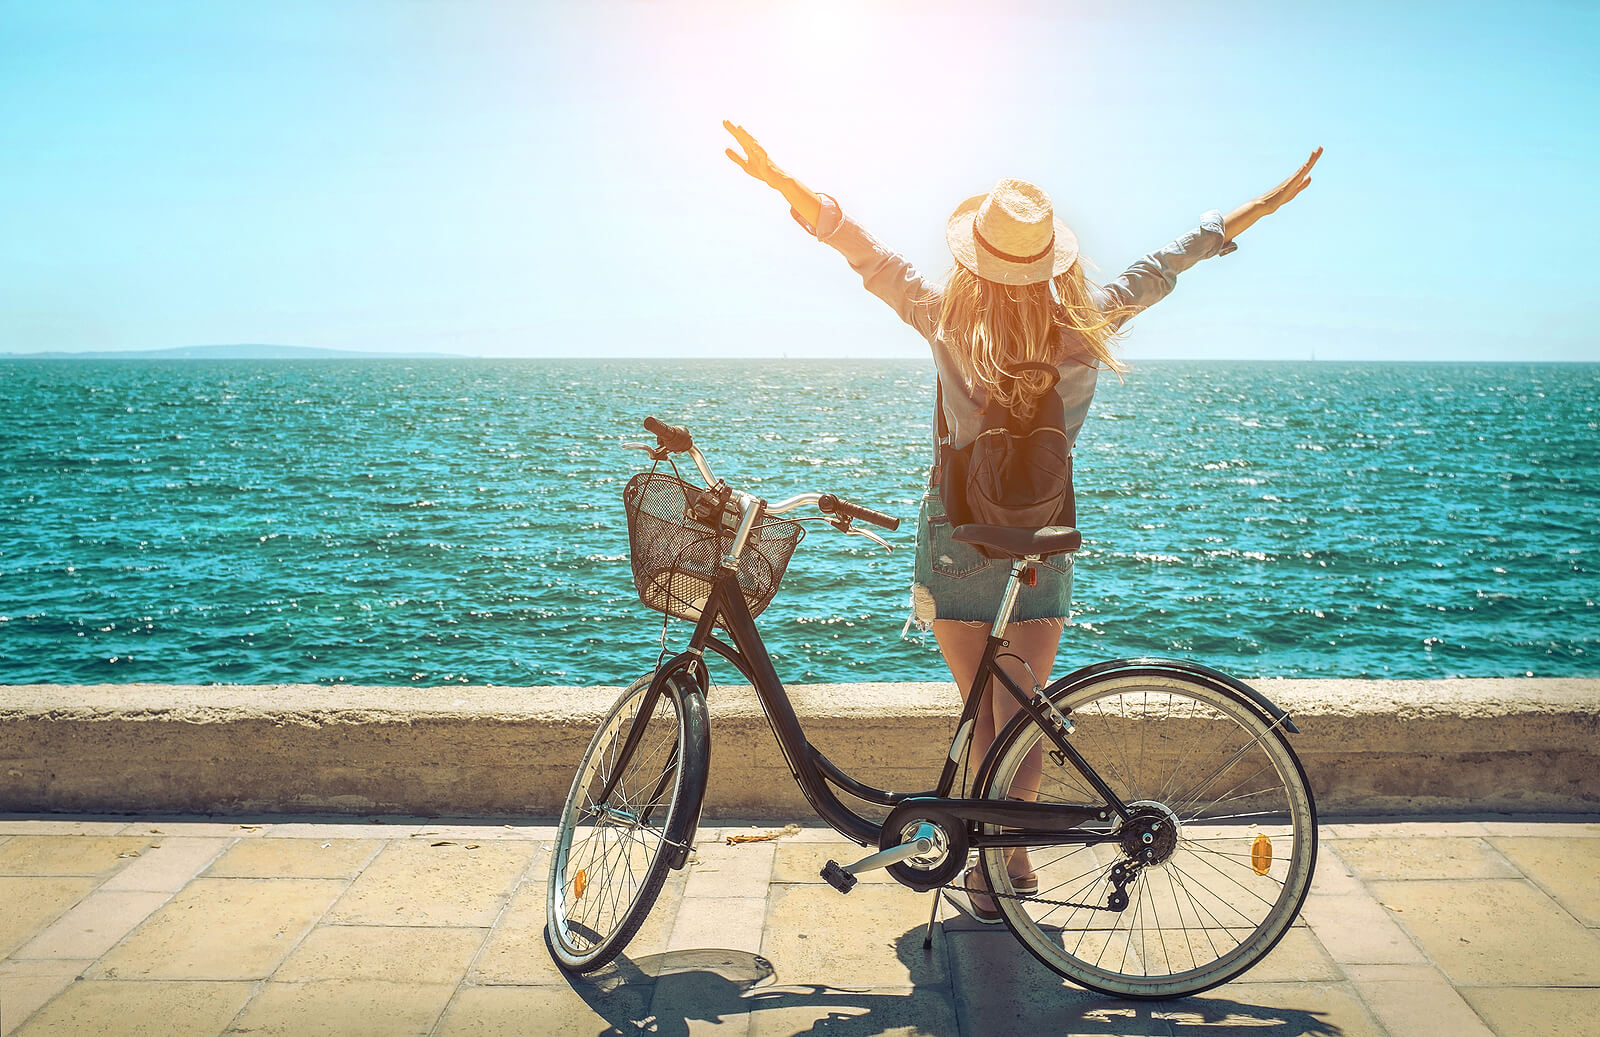 Image of a woman standing near a bike in front of the ocean holding her arms up on a sunny day. Do you suffer from panic attacks? Learn how anxiety therapy in Saint Petersburg, FL can help you find your triggers and understand how to cope.